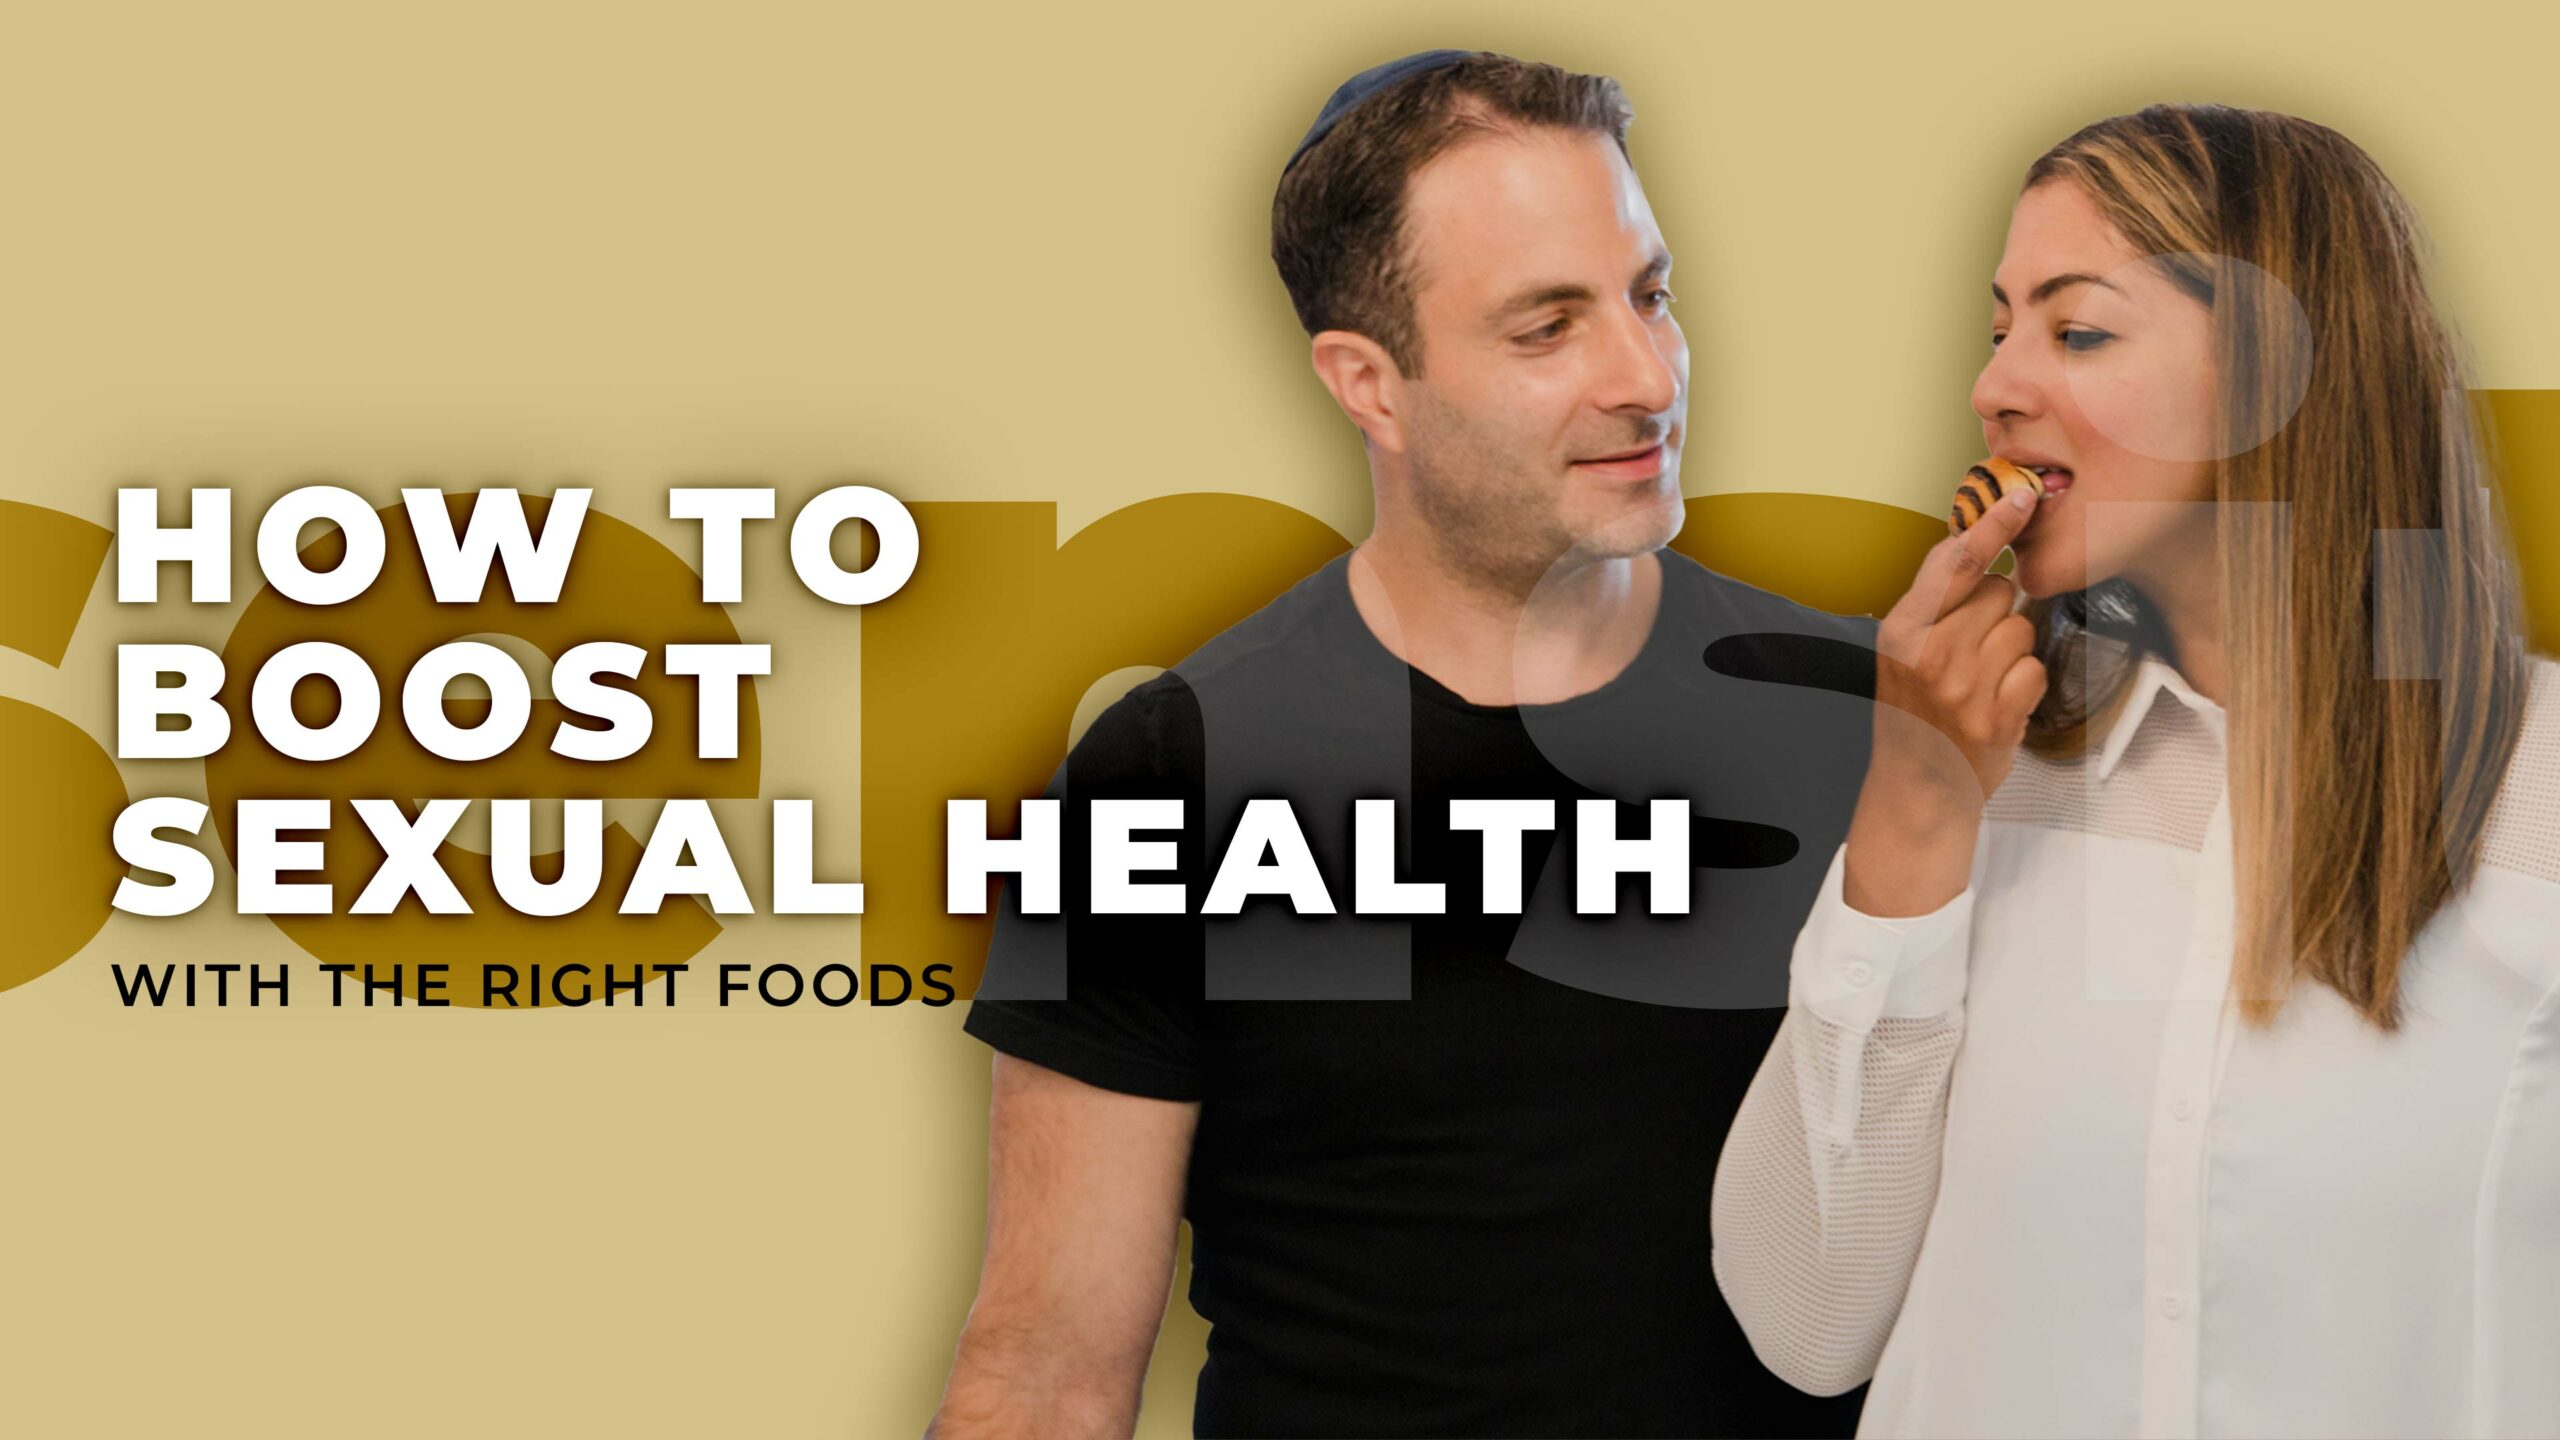 How to Boost Sexual Health with the Right Foods